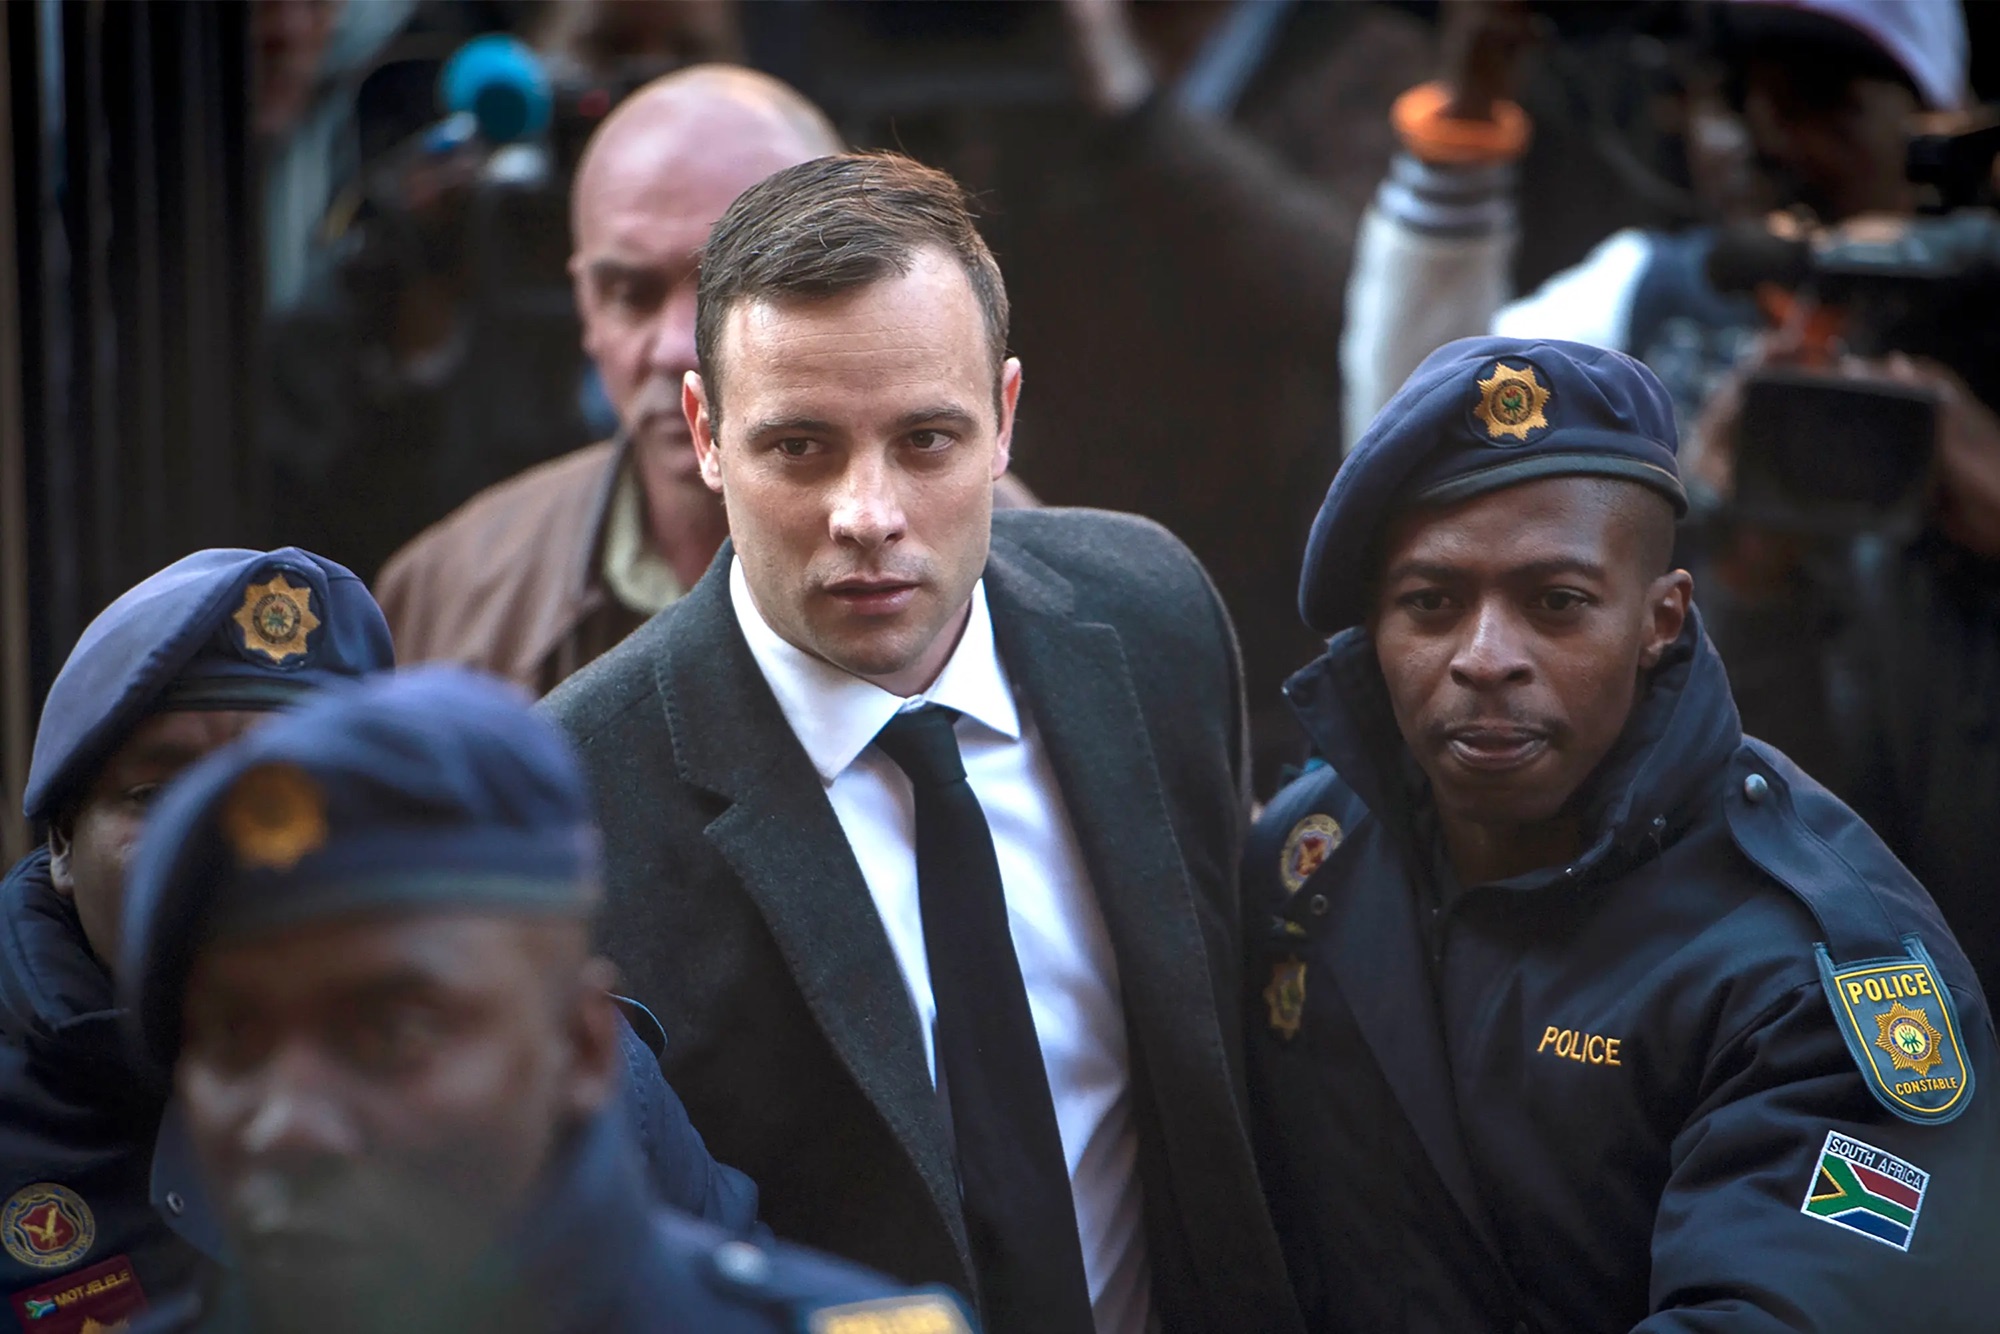 Former Paralympian, Oscar Pistorius is now a free man as he’s smuggled out of prison after serving half his 13-year jail term